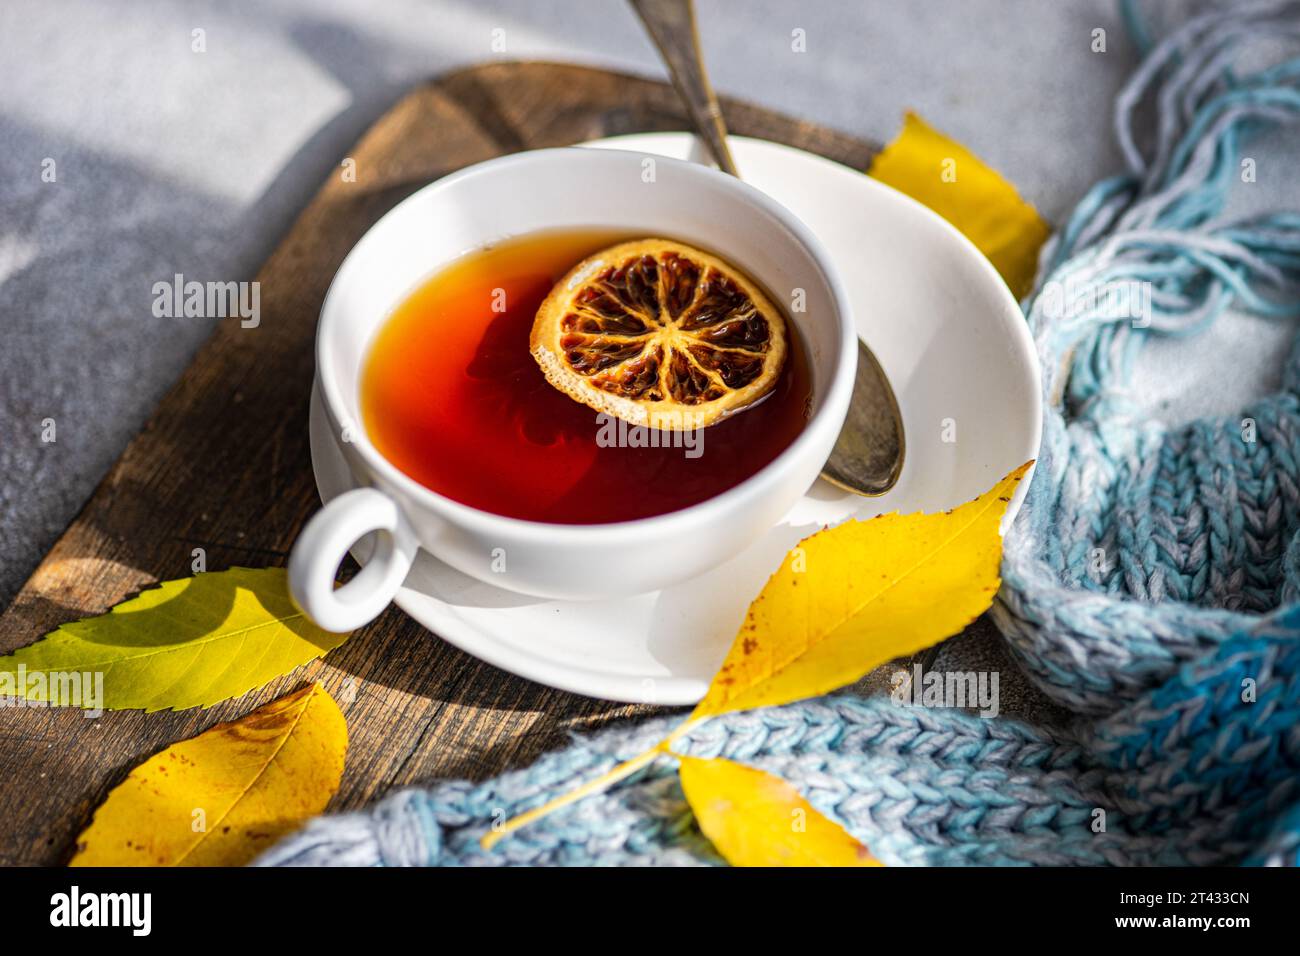 Overhead view of a cup of spiced black tea with lemon and autumnal styling Stock Photo